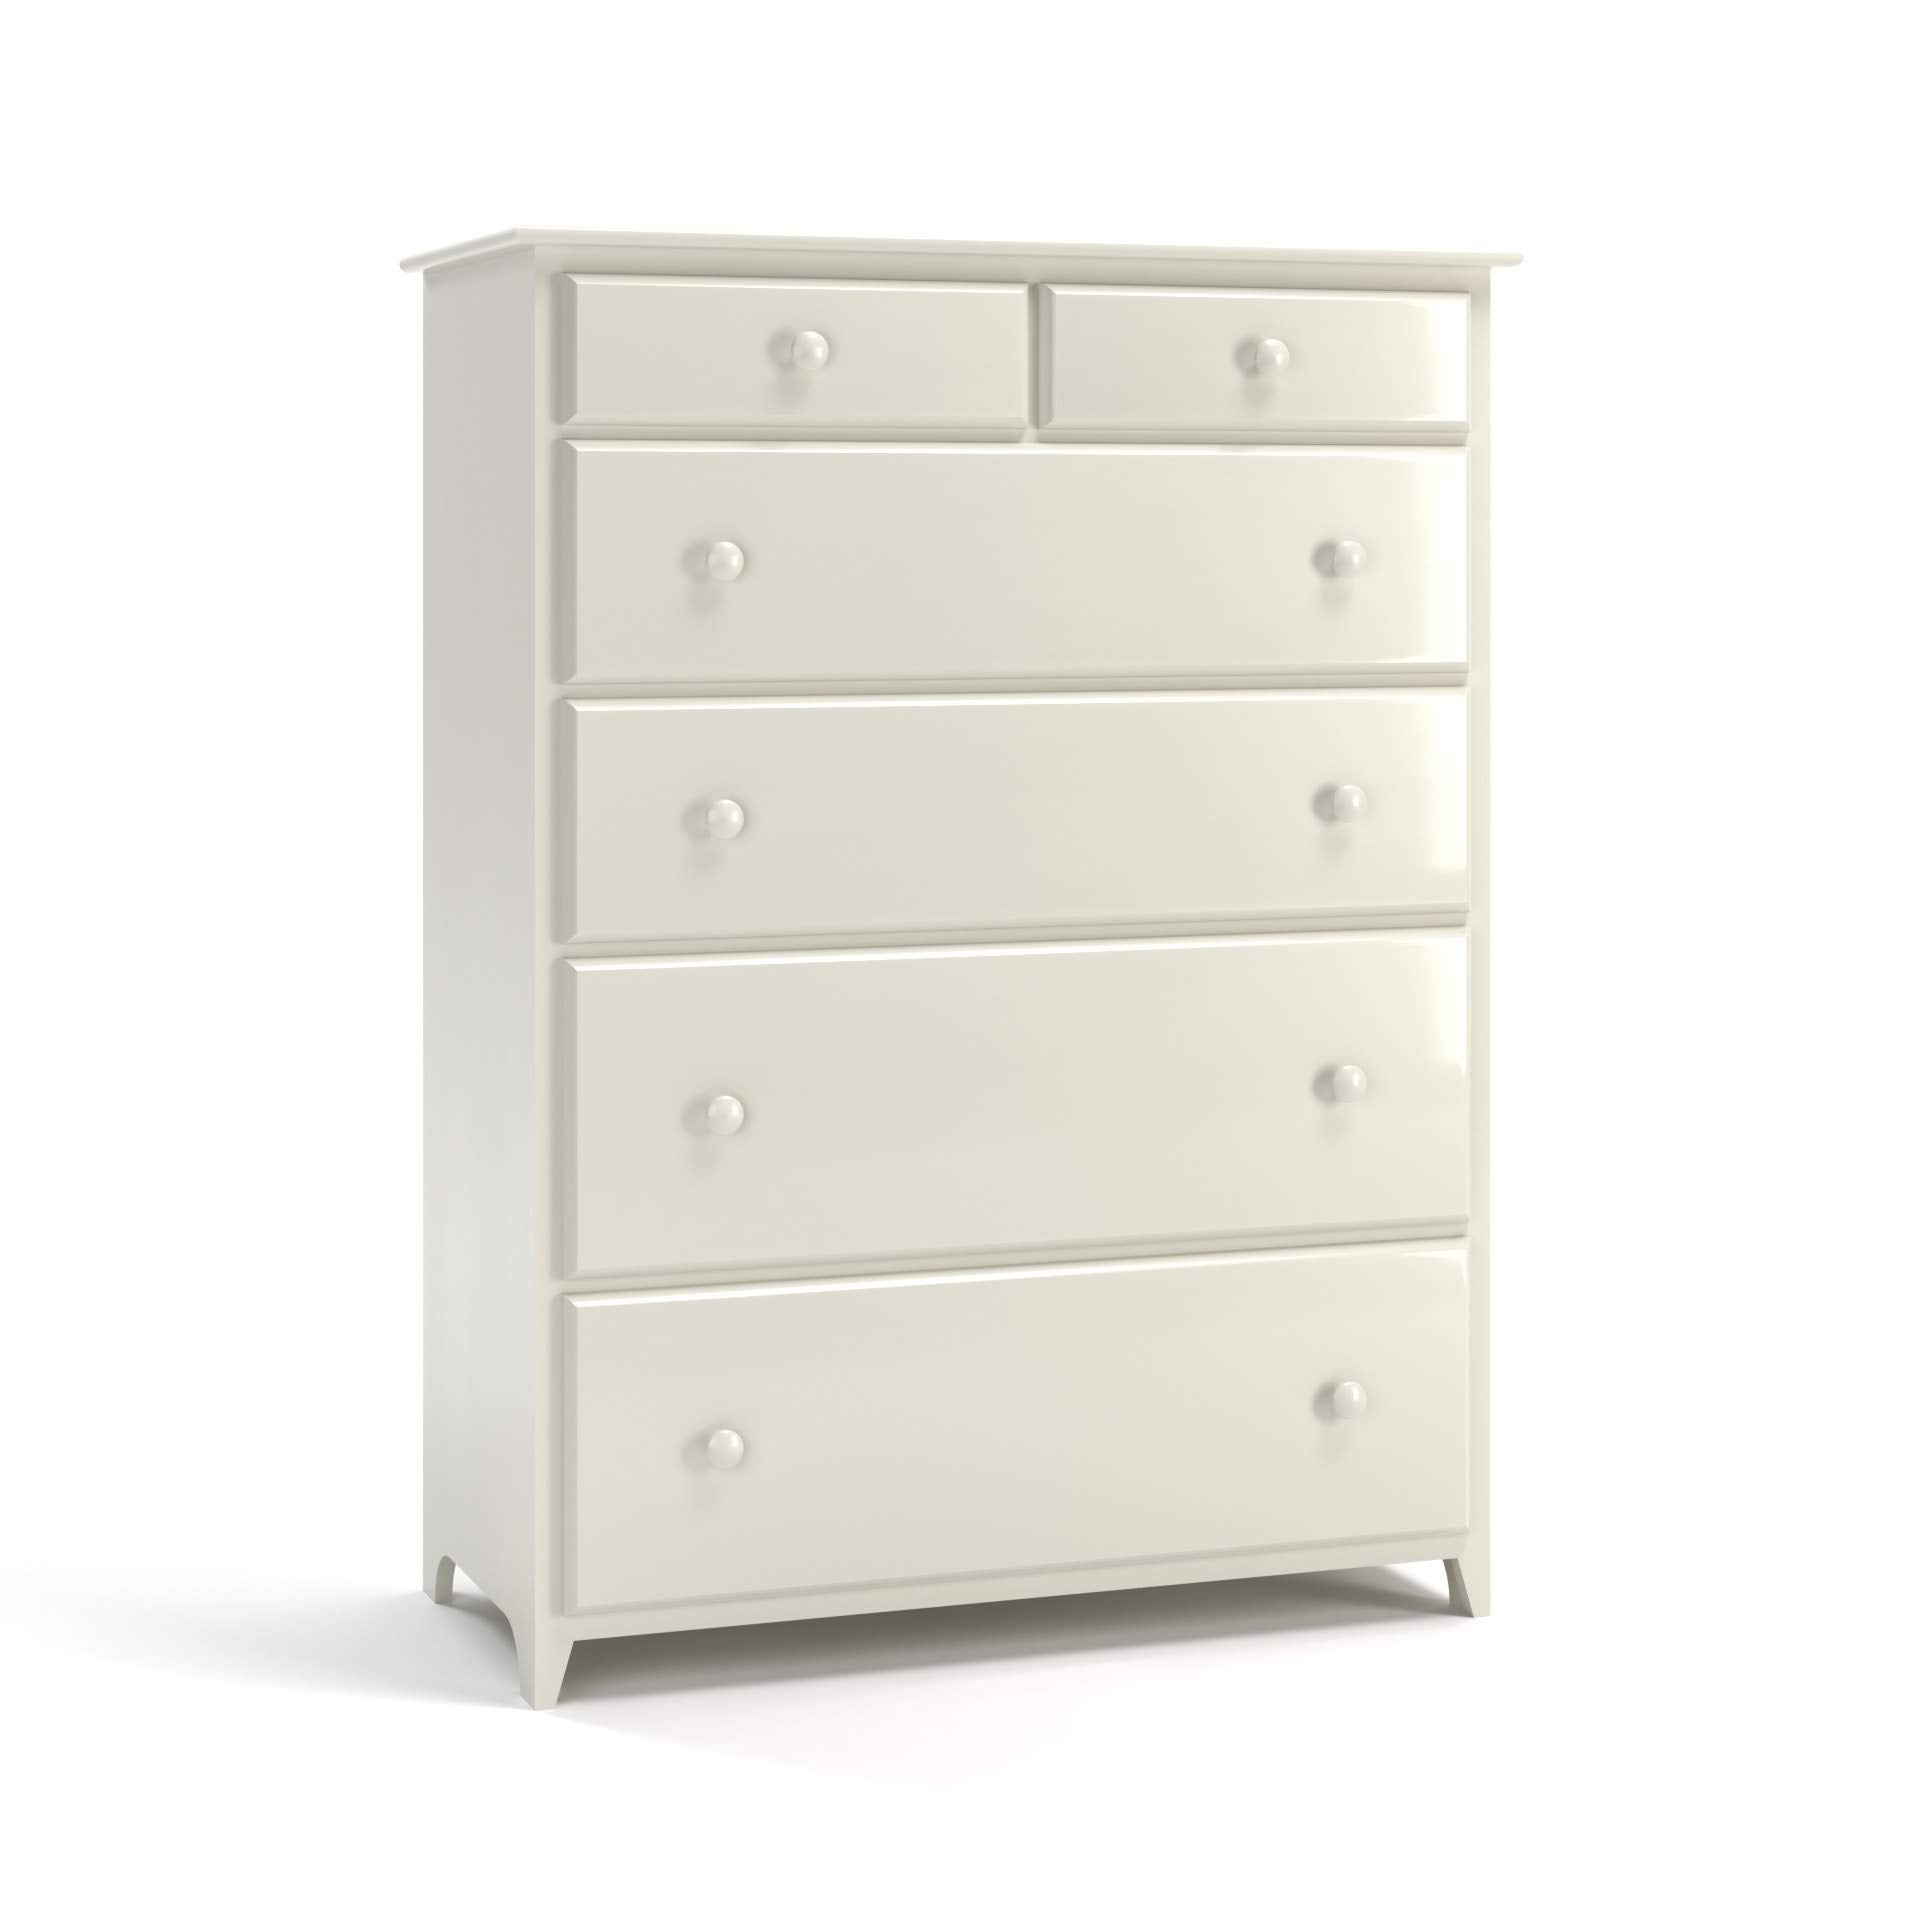 Acadia Shaker Chest with Split Top Drawer with two small drawers on top and four larger drawers below. Pictured in White.